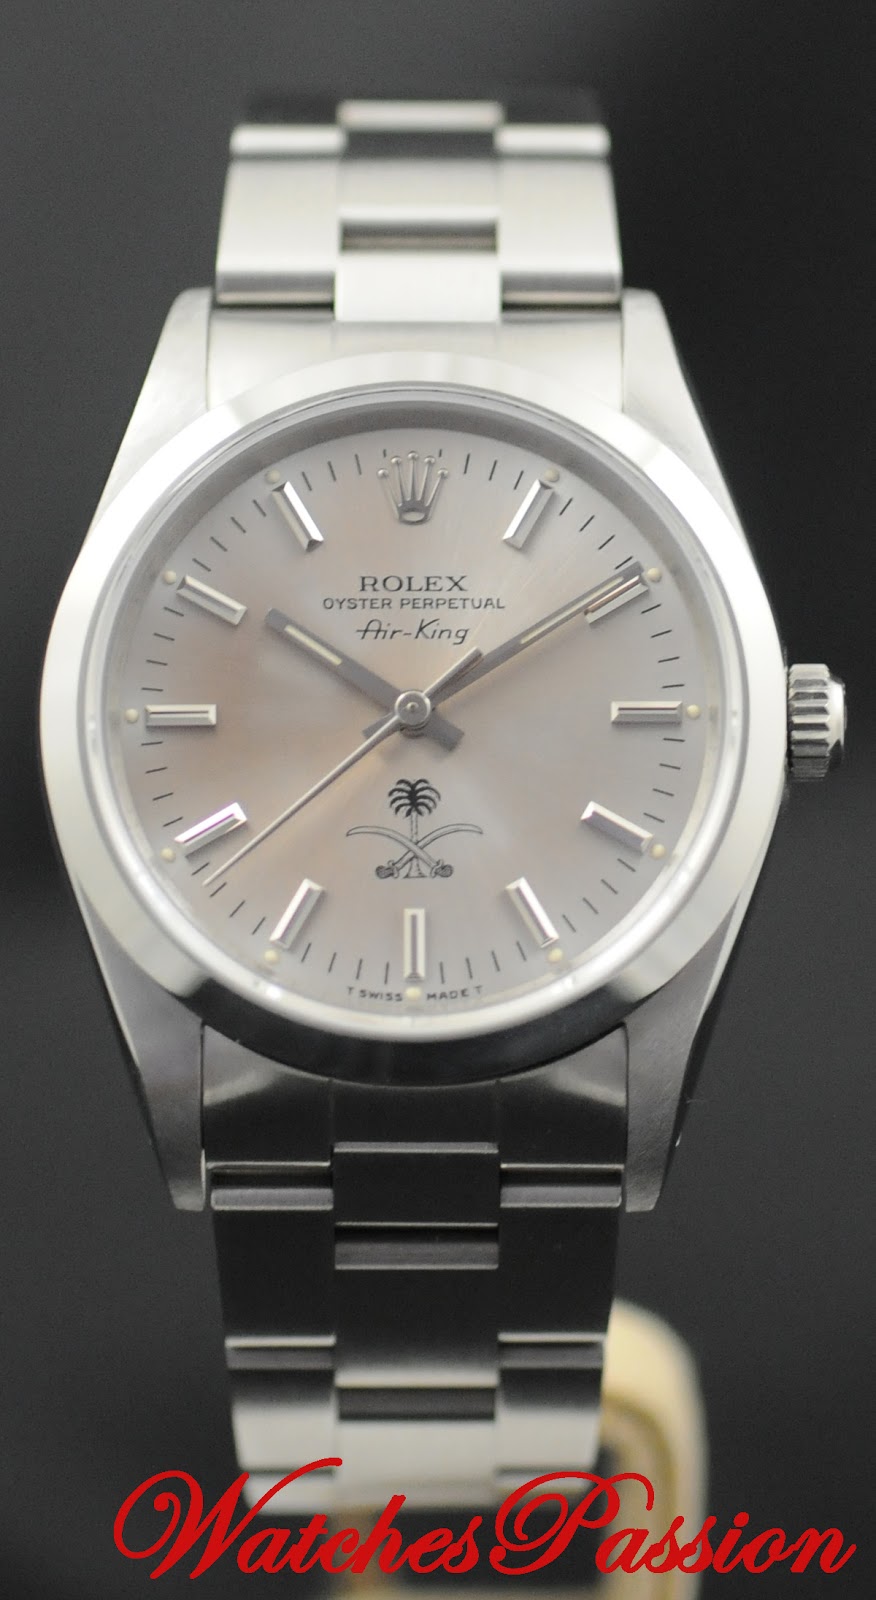 Watches Passion: Rolex Air King 14000 Saudi Logo